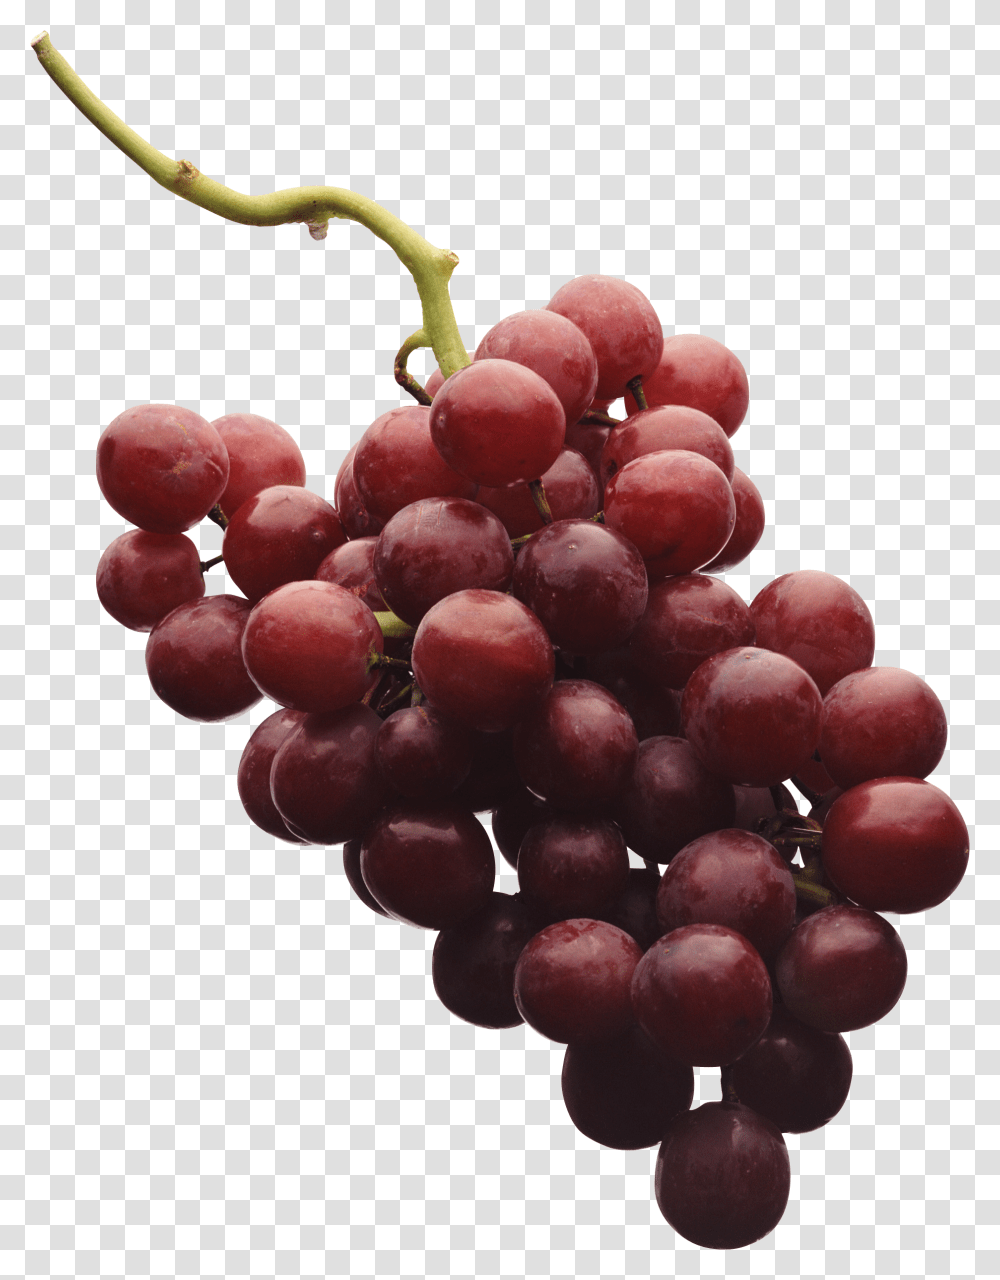 Red Grapes Image For Free Download Grape, Plant, Fruit, Food Transparent Png